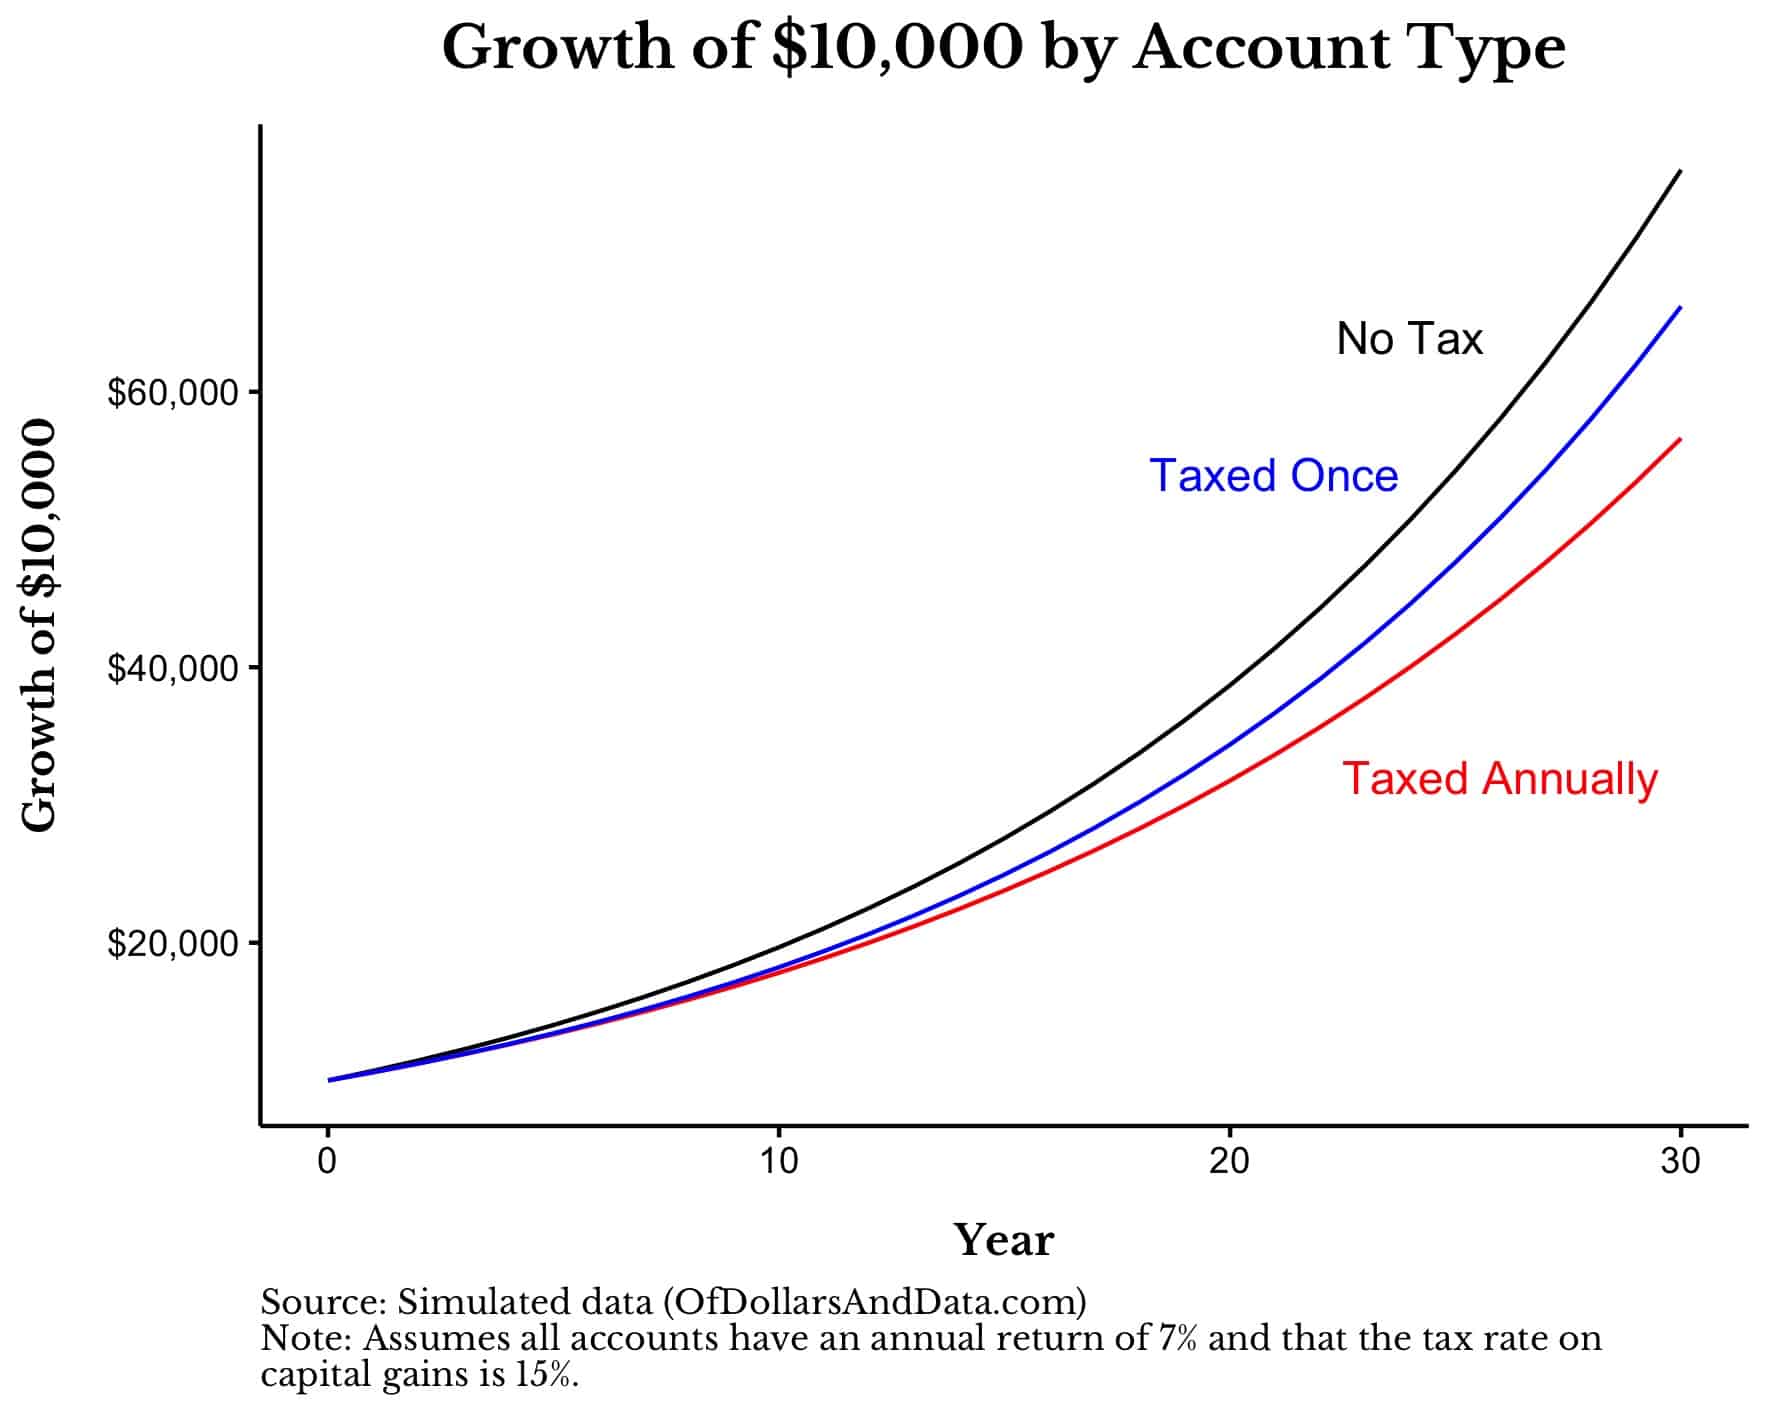 Growth of $10,000 in hypothetical account by account type.